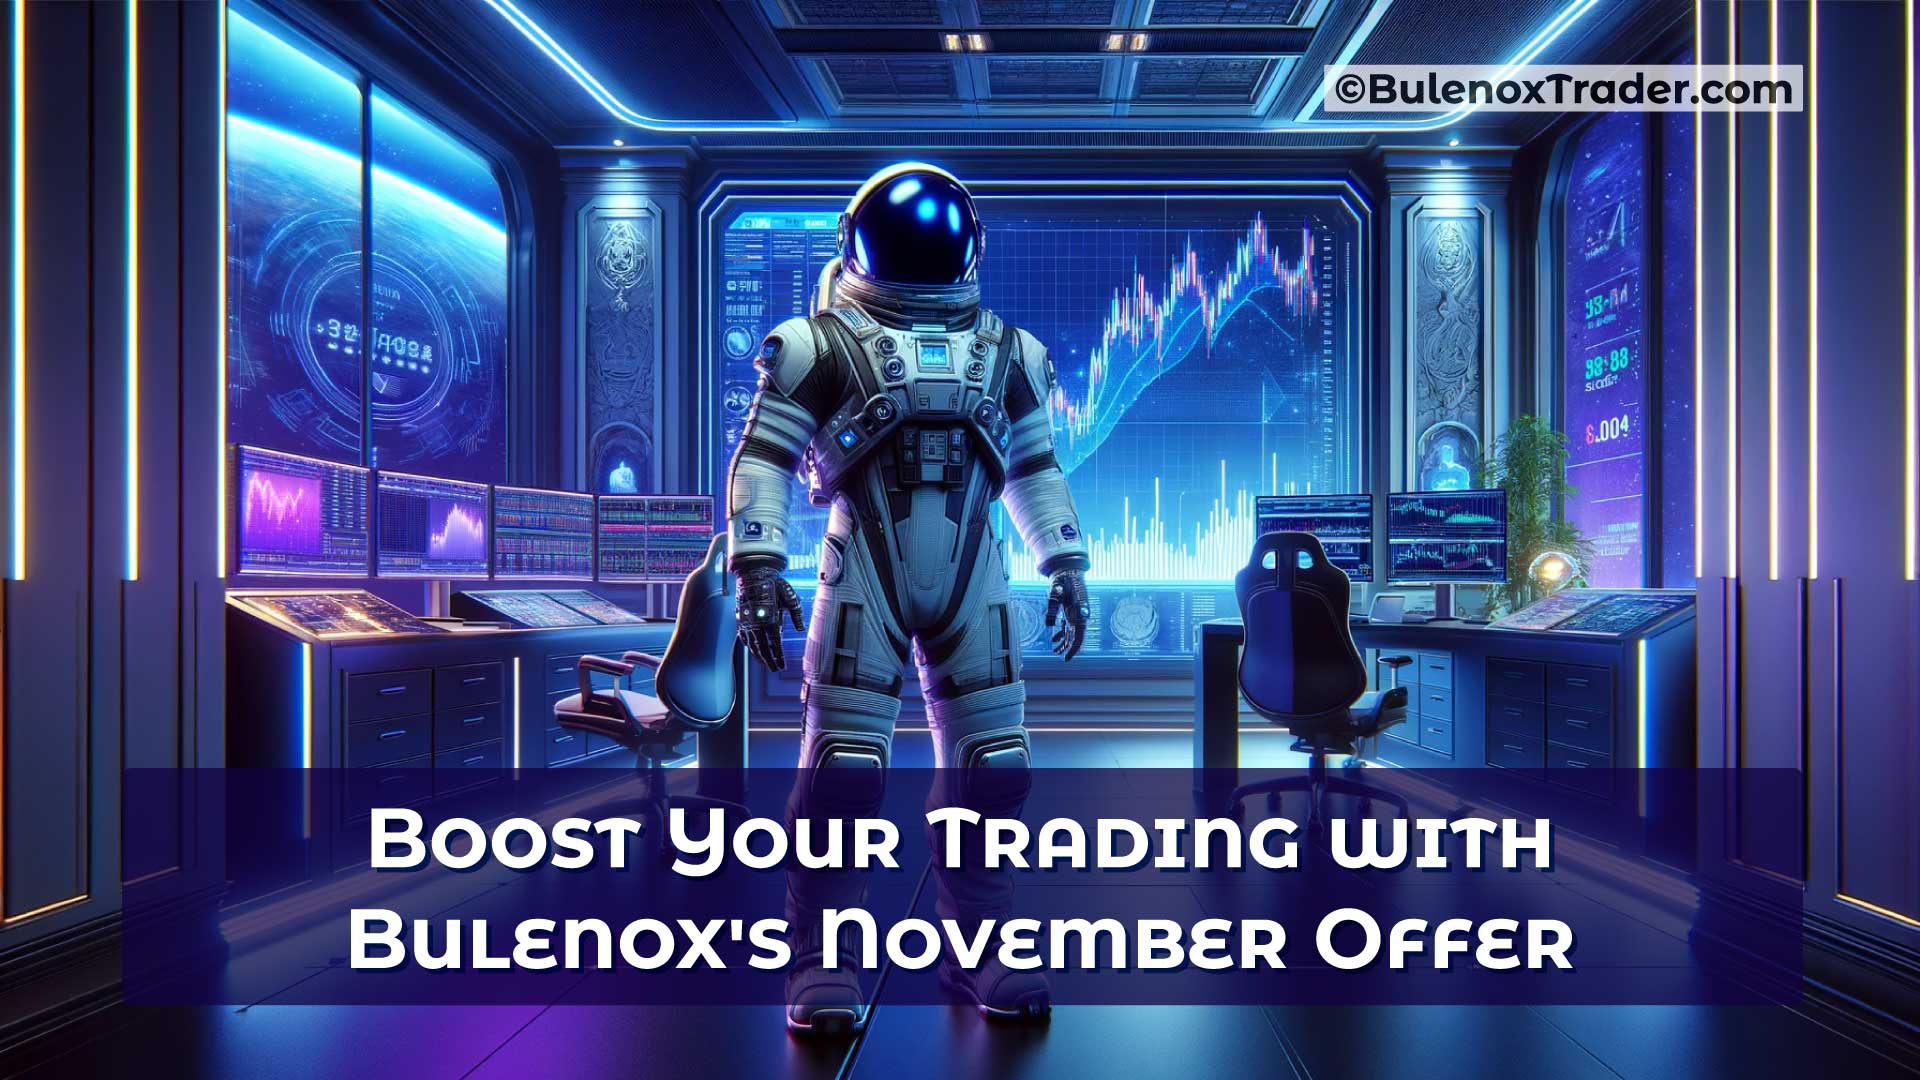 Boost-Your-Trading-with-Bulenox's-November-Offer-on-Bulenox-Trader-Website